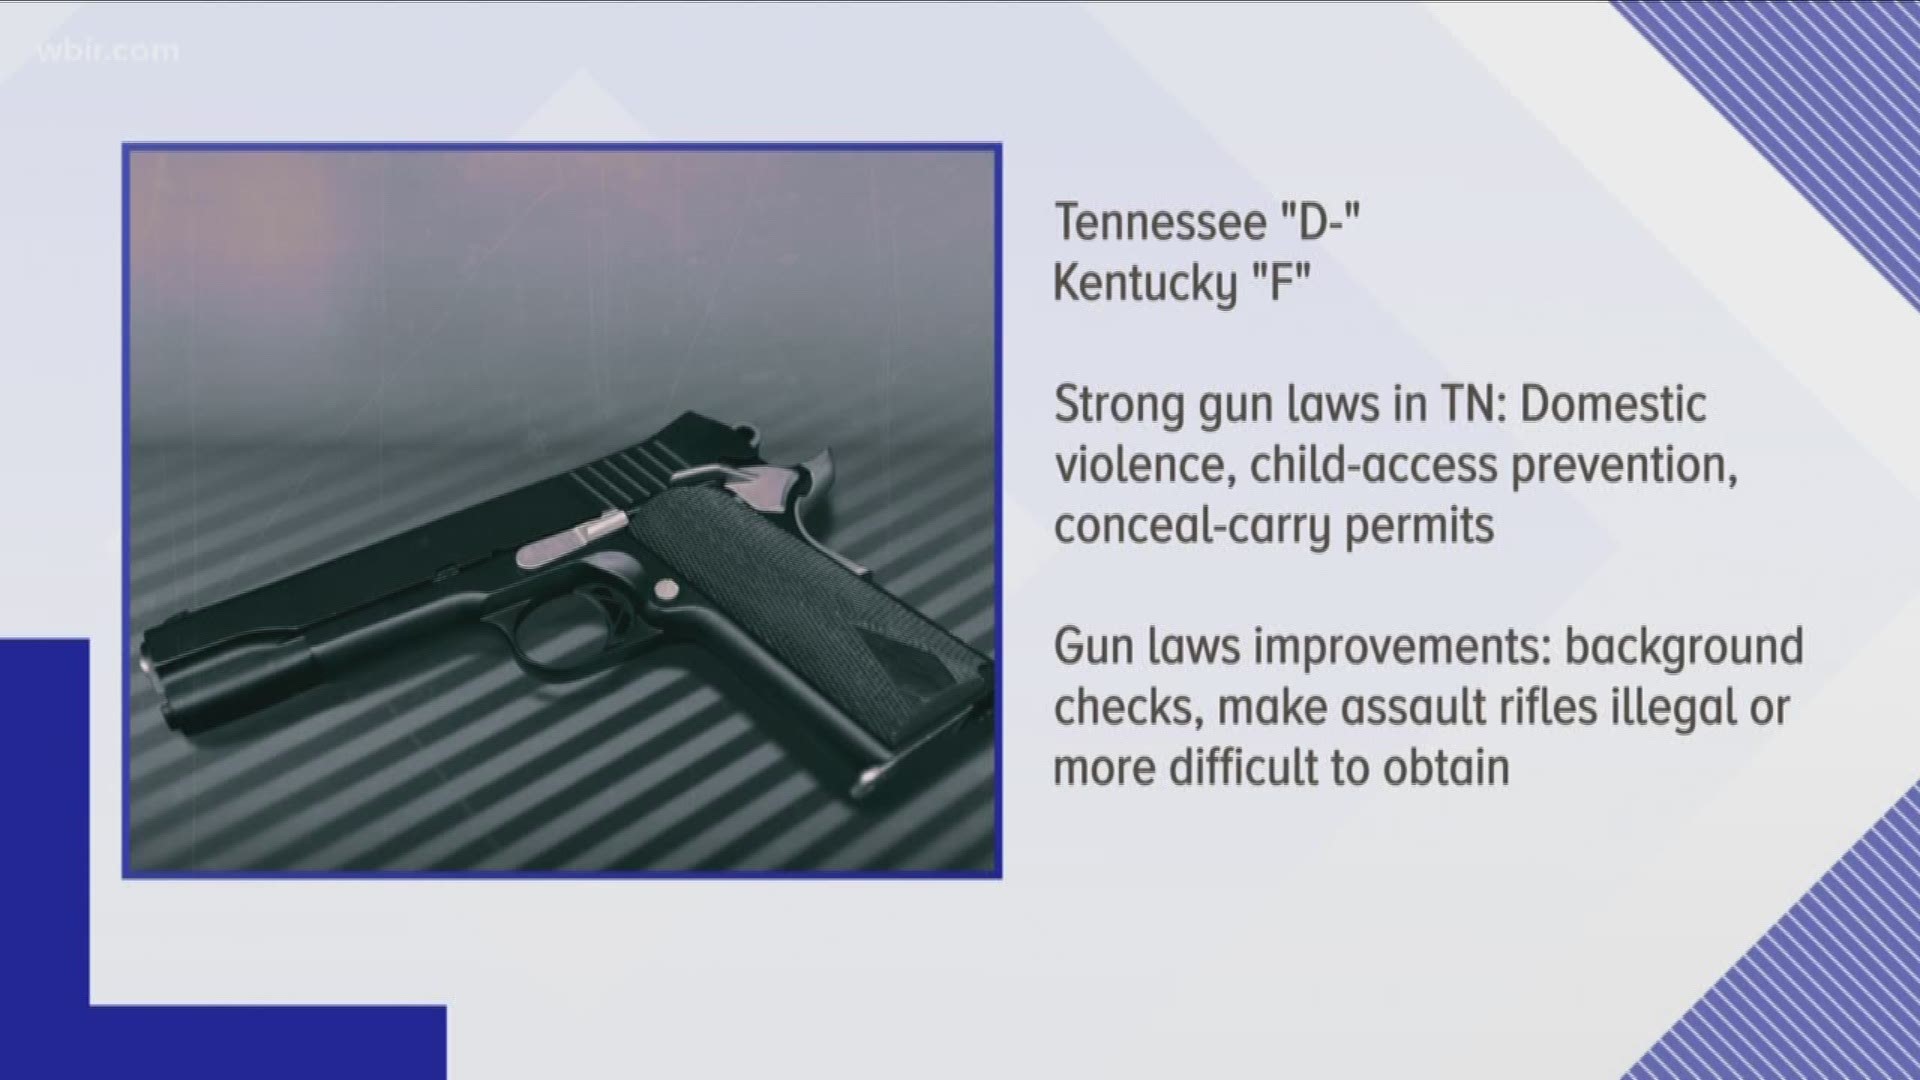 Tennessee receives 'D' rating for gun safety laws in study